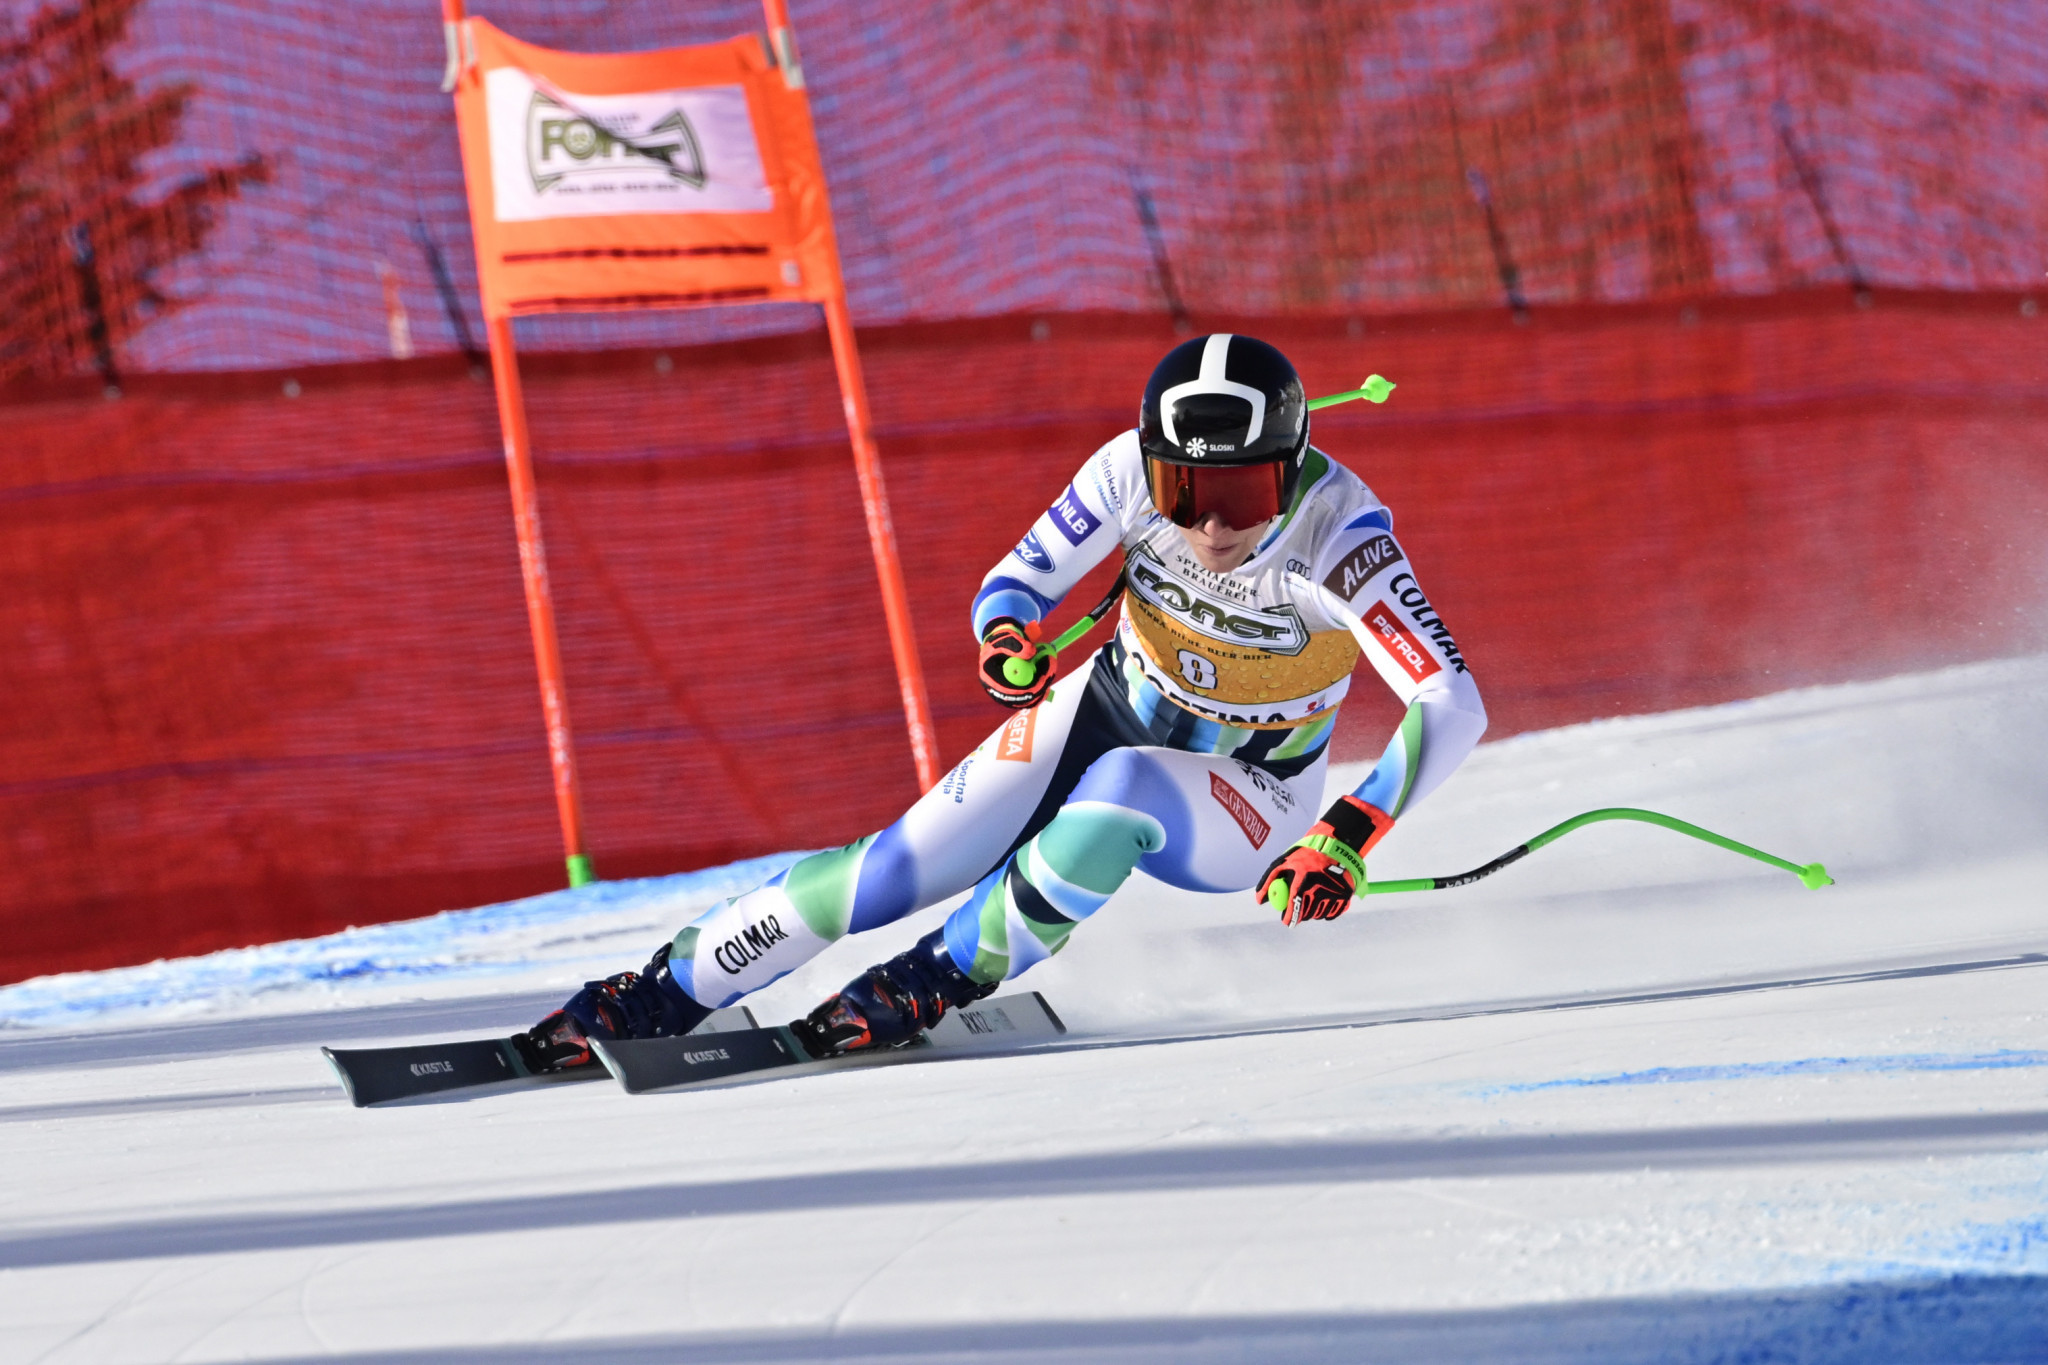 Štuhec wins first Alpine Ski World Cup race in over four years in Cortina d'Ampezzo downhill